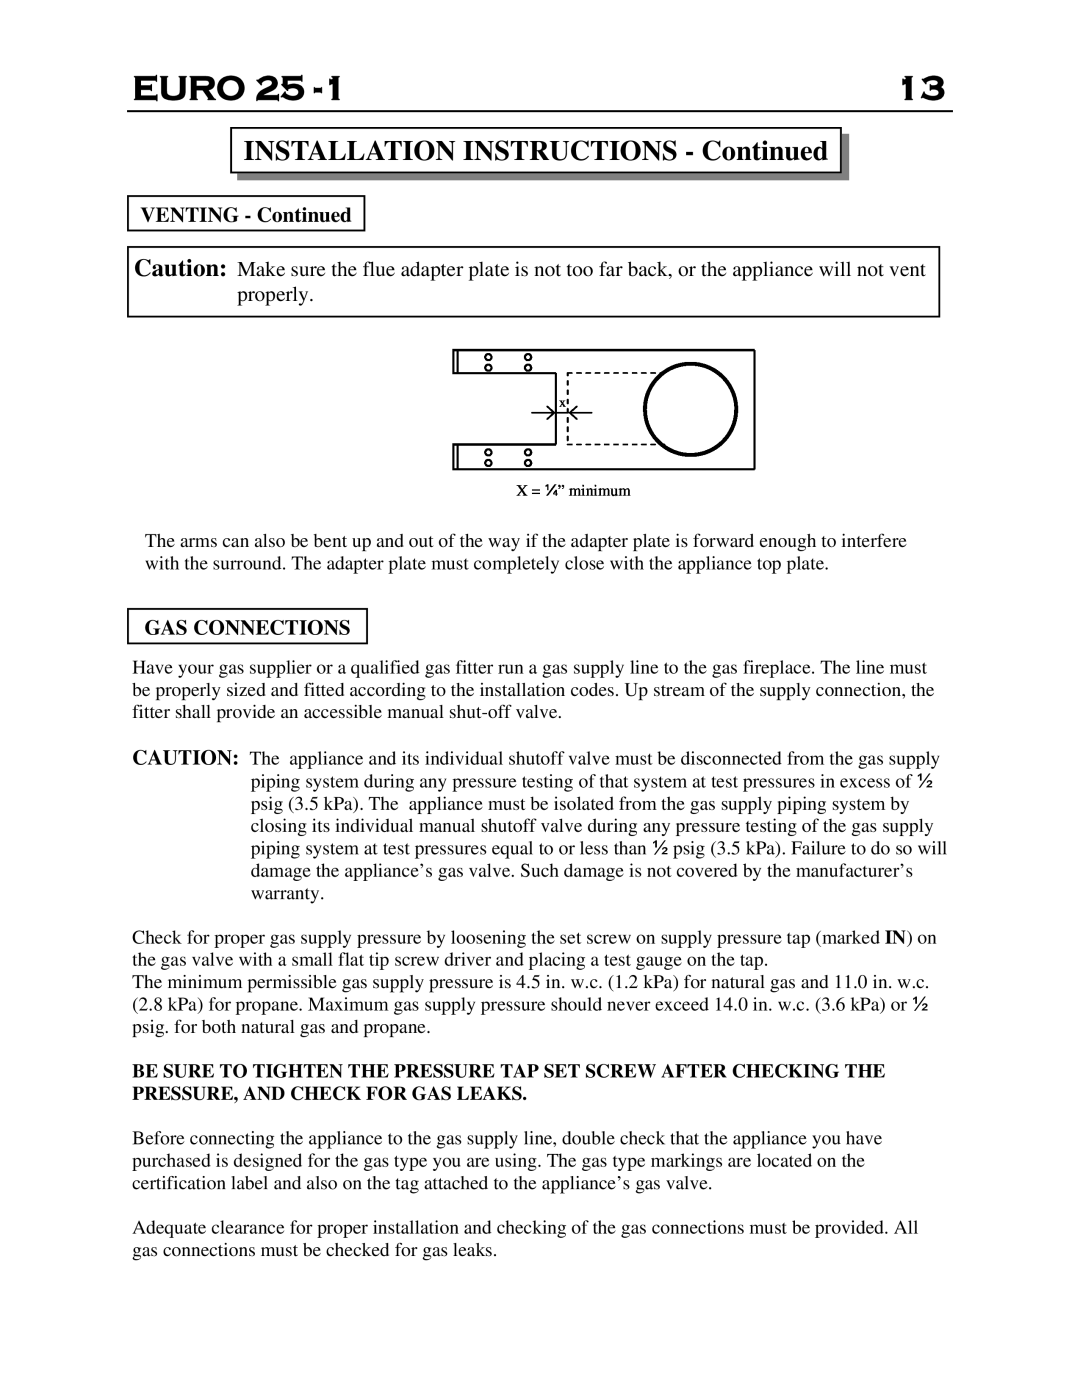 Delkin Devices EI - 25-1 manual Euro, INSTALLATION INSTRUCTIONS - Continued, VENTING - Continued, Gas Connections 